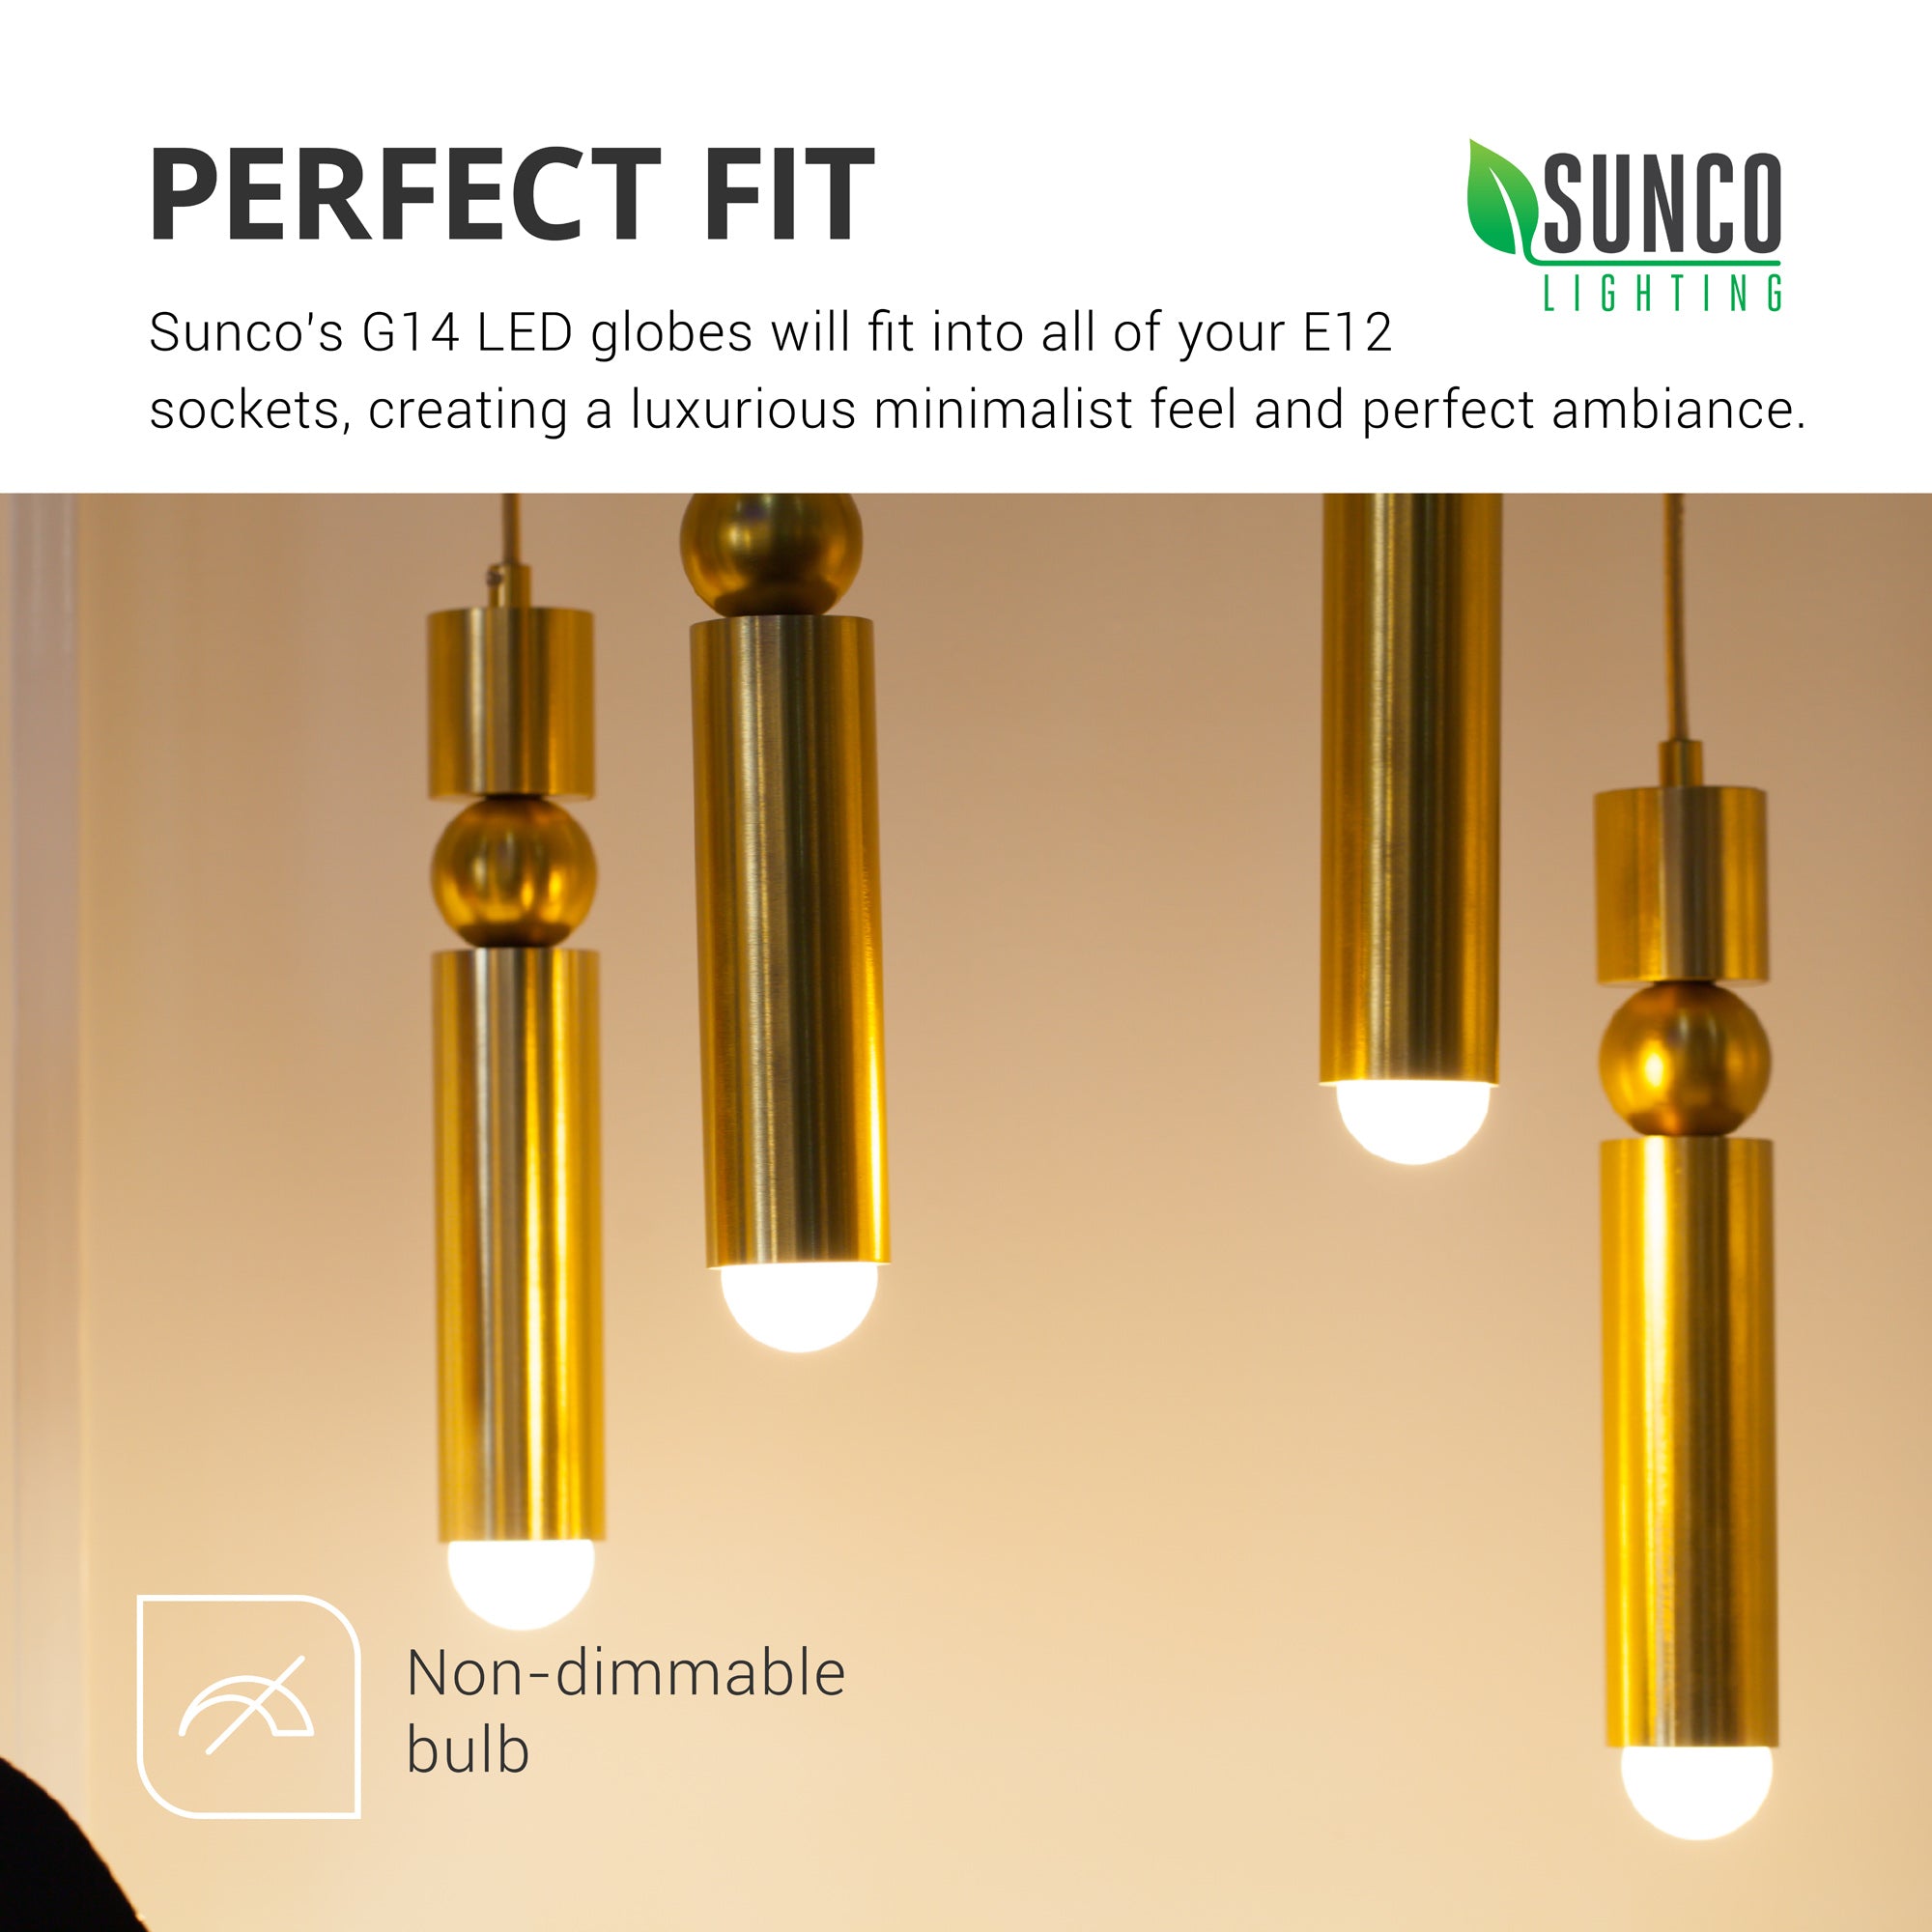 Sunco’s 5W G14 LED globe light bulbs fit in E12 sockets. Here they are seen in modern, pendant fixtures to create a minimalist feel to your space. This compact bulb creates a nice, decorative light for your room accent lighting, while consuming only 5W each. With 15,000 lifetime hours, this bulb will reduce your relamping needs in addition to lowering the wattage used by your light bulbs when you replace outdated, traditional light bulbs.